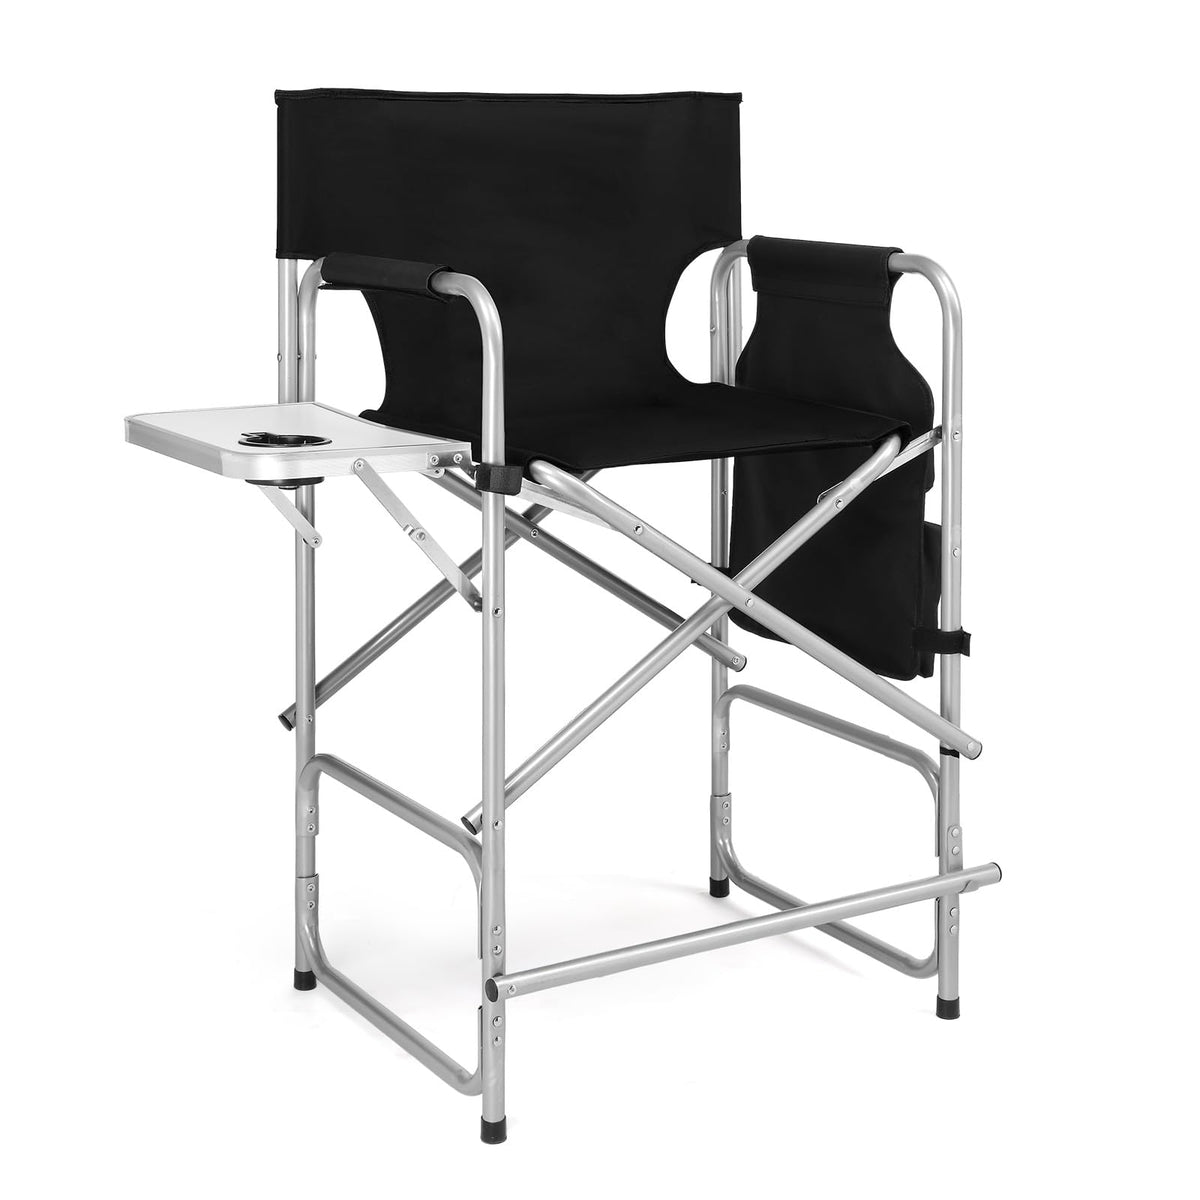 OmySalon 26in Directors Chair Folding Makeup Artist Chair with Side Table Black